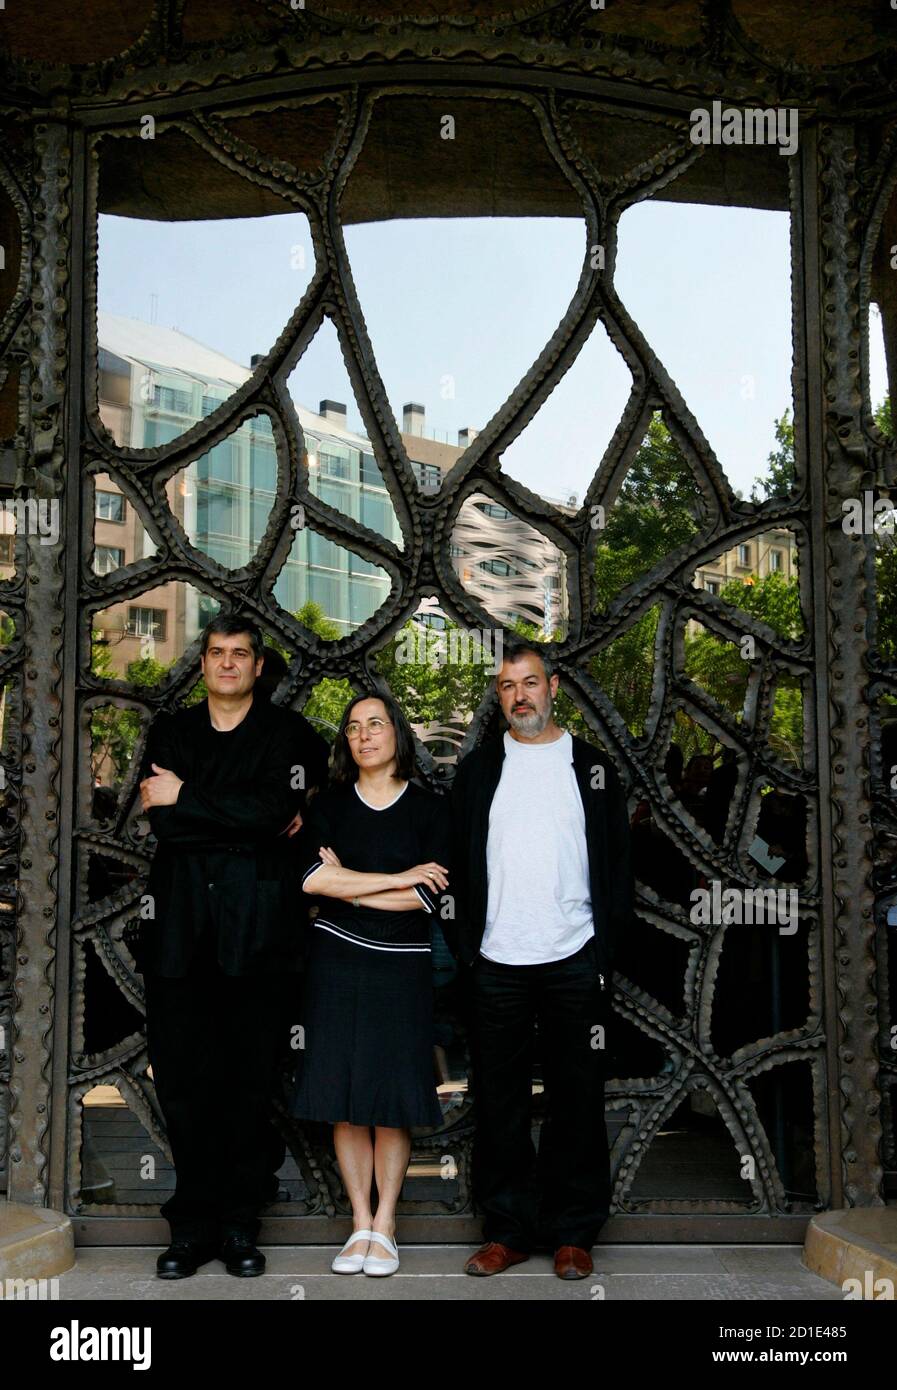 (L-R) Rafael Aranda, Carme Pigem and Ramon Vilalta from RCR Arquitectes, finalists in the Mies van der Rohe Arch European Union Prize 2009, pose in front of the modernist building by architect Antoni Gaudi called 'La Pedrera' in central Barcelona April 22, 2009. The winner of the architecture prize will be announced on April 29, 2009.   REUTERS/Gustau Nacarino  (SPAIN SOCIETY) Stock Photo